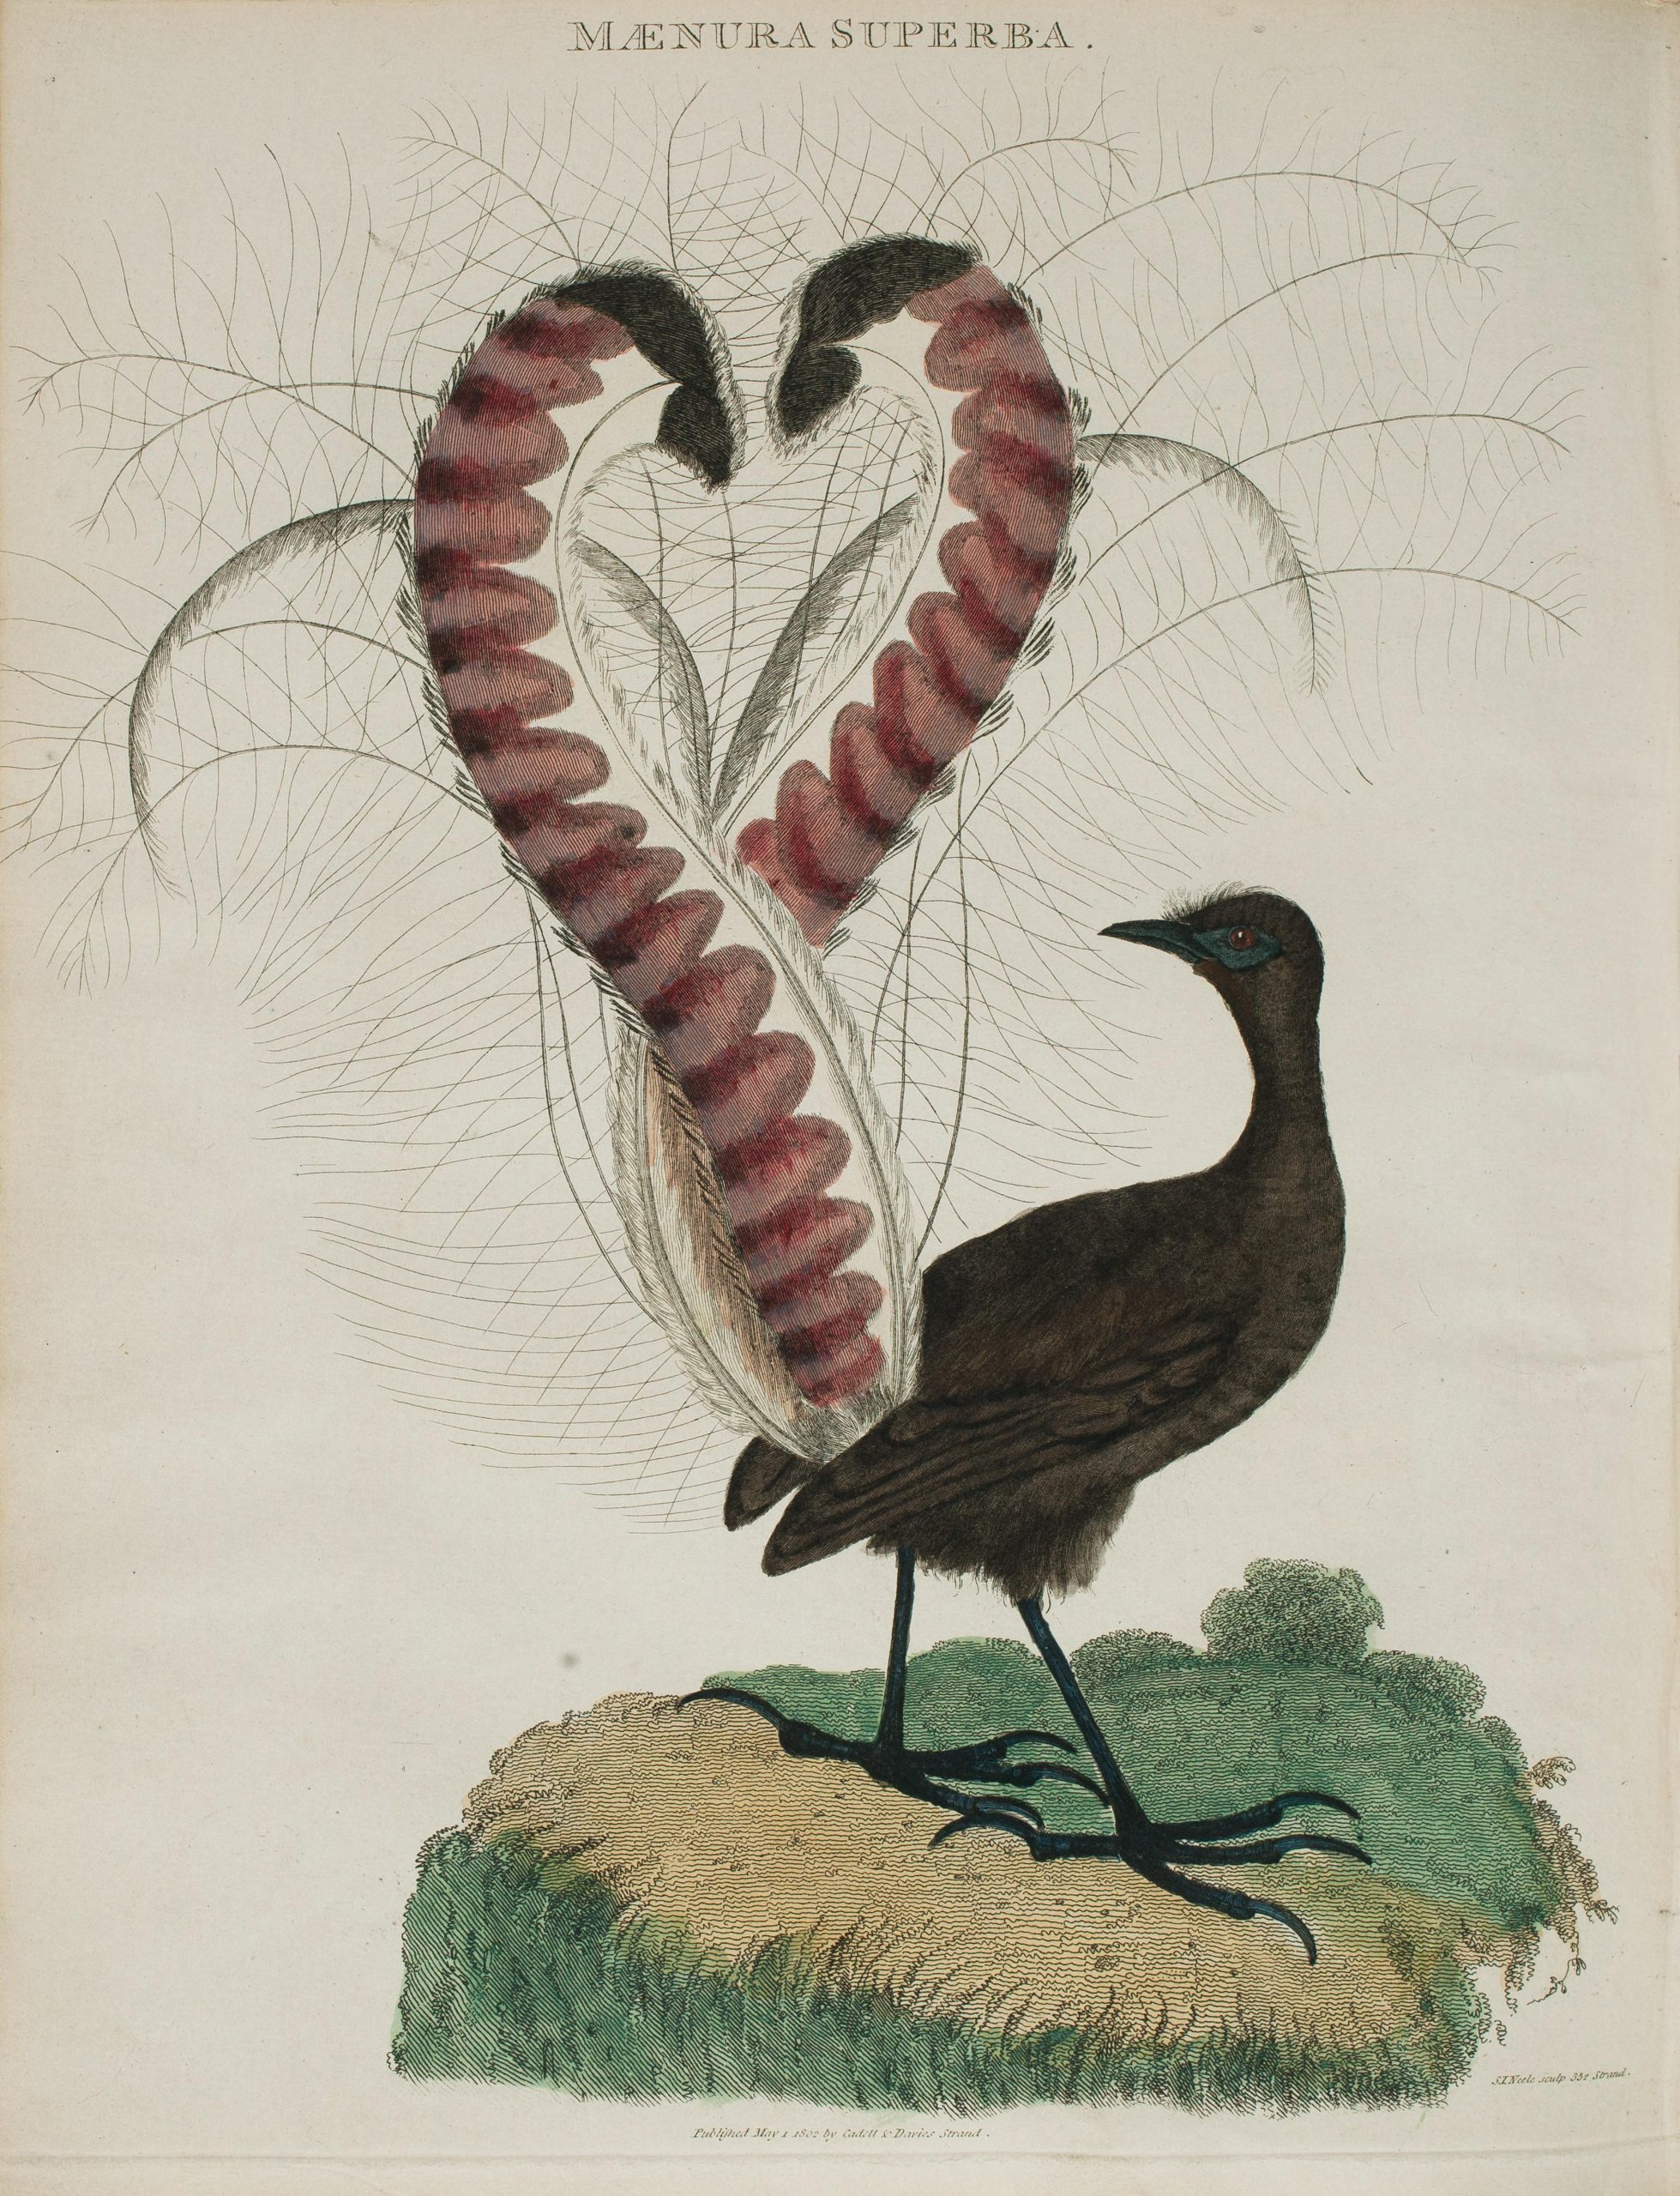 A brown bird with long, pink tail feathers illustrated on a grassy platform